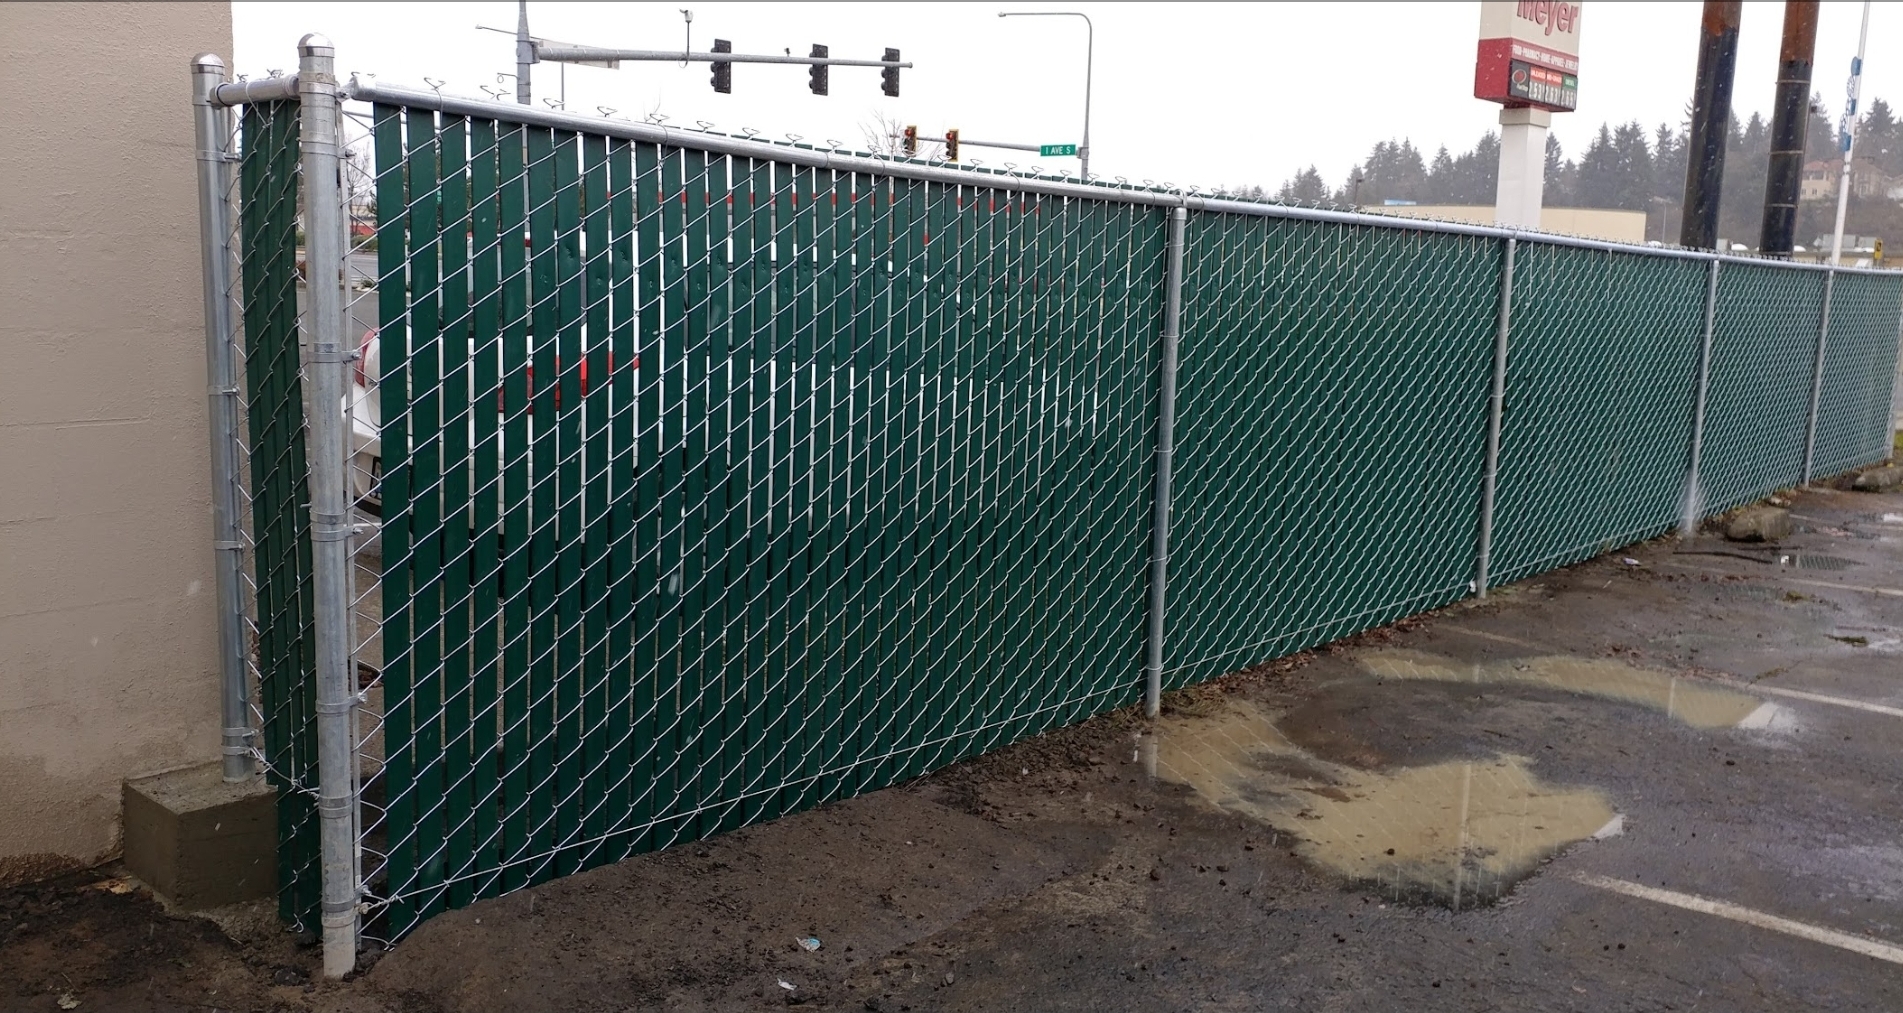 GALVANIZED CHAIN LINK FENCE WITH GREEN PRIVACY SLATS.